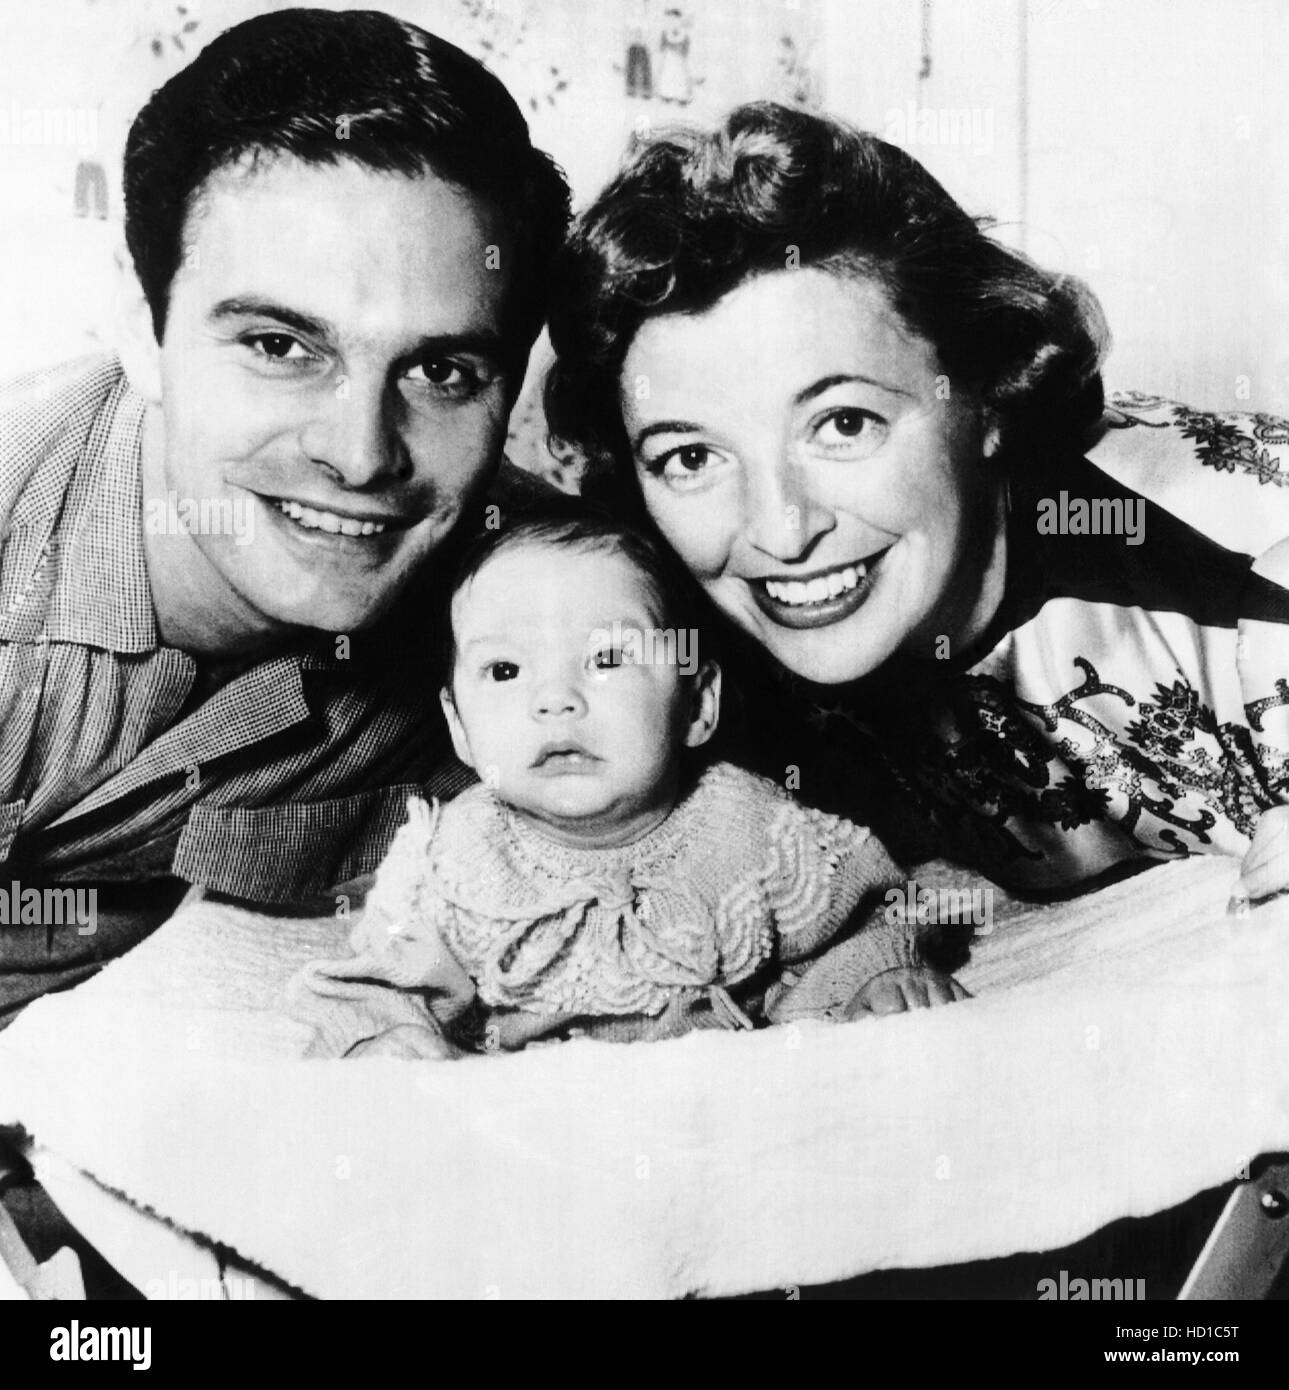 Louis Jourdan, left, and his wife, Berthe Jourdan, with their son ...